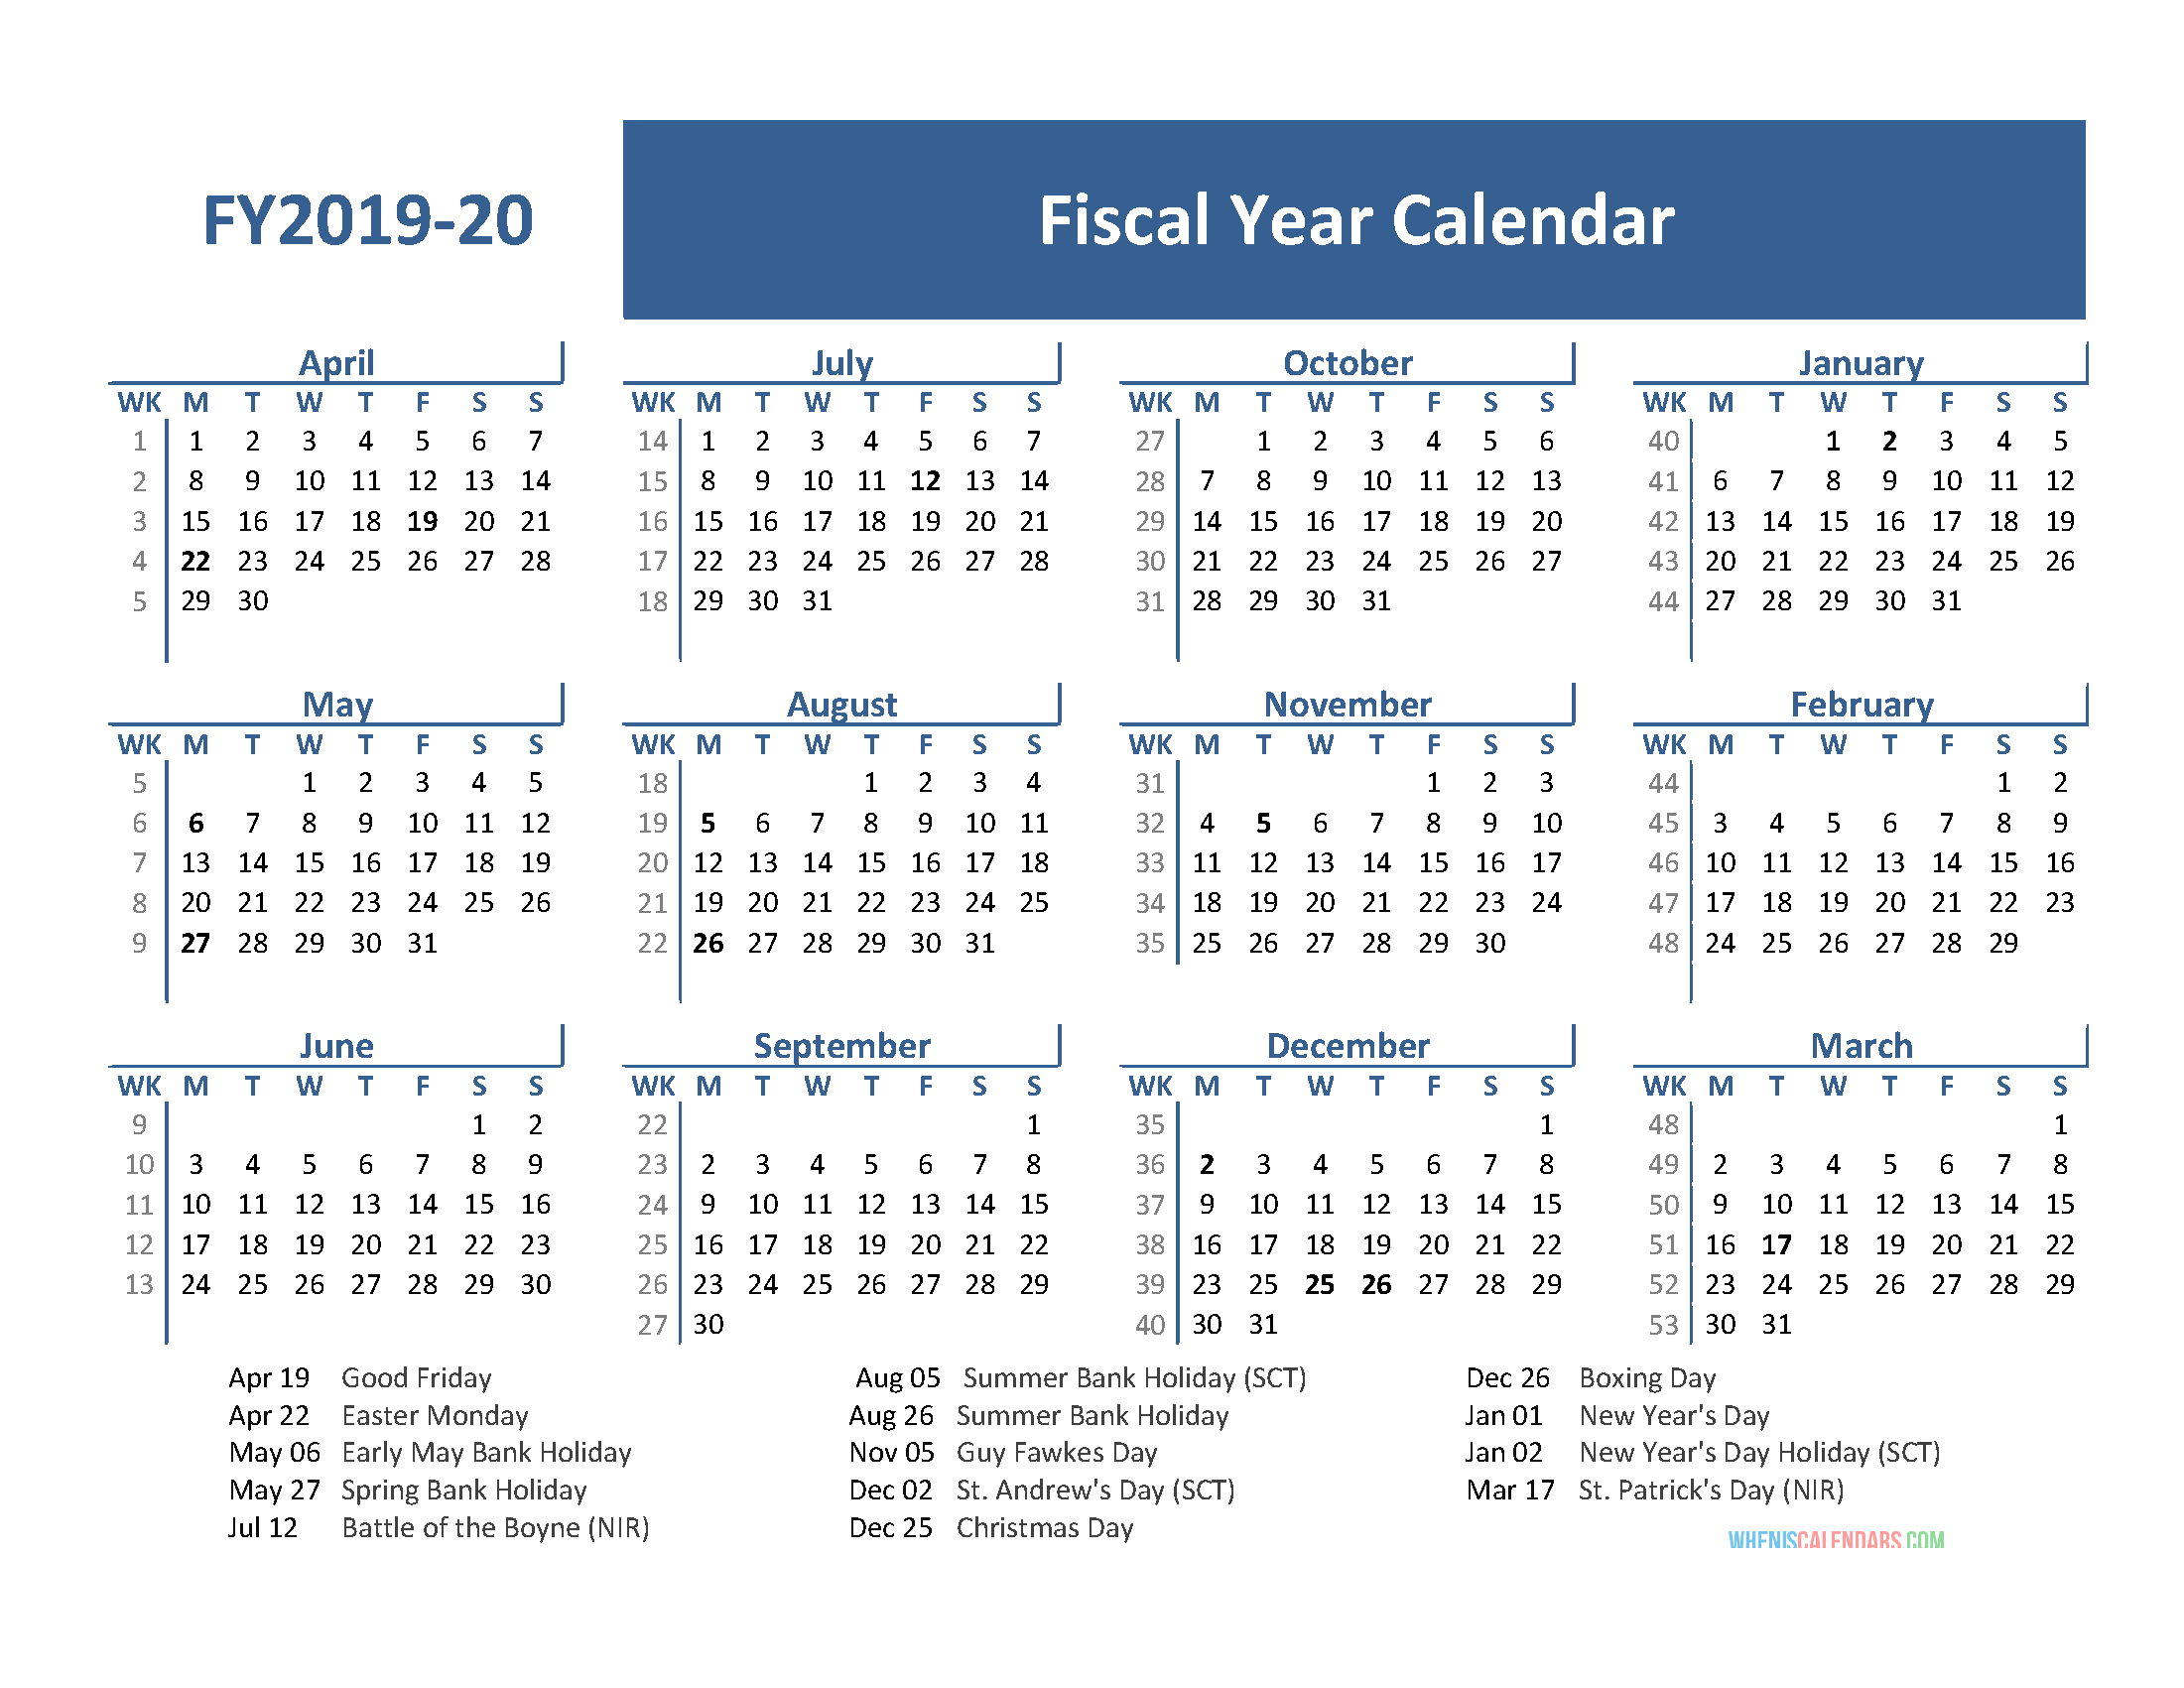 Fiscal Year 2019 Calendar With Holidays (April 2019-March